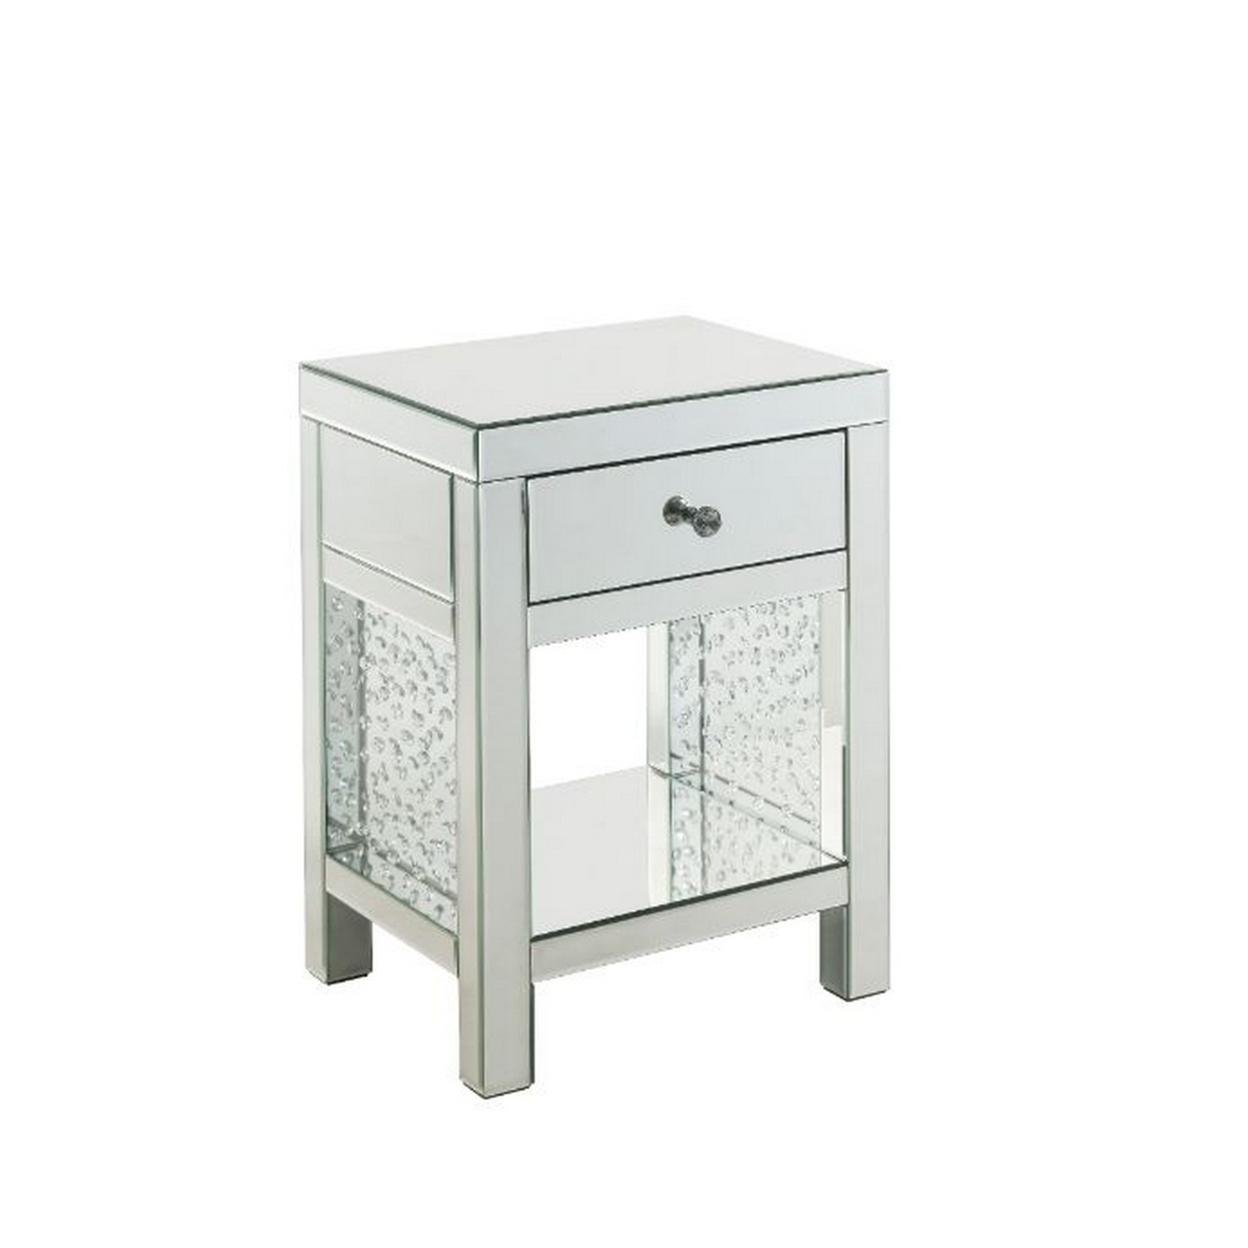 Accent Table With Rectangular Faux Crystals Inlay, White- Saltoro Sherpi